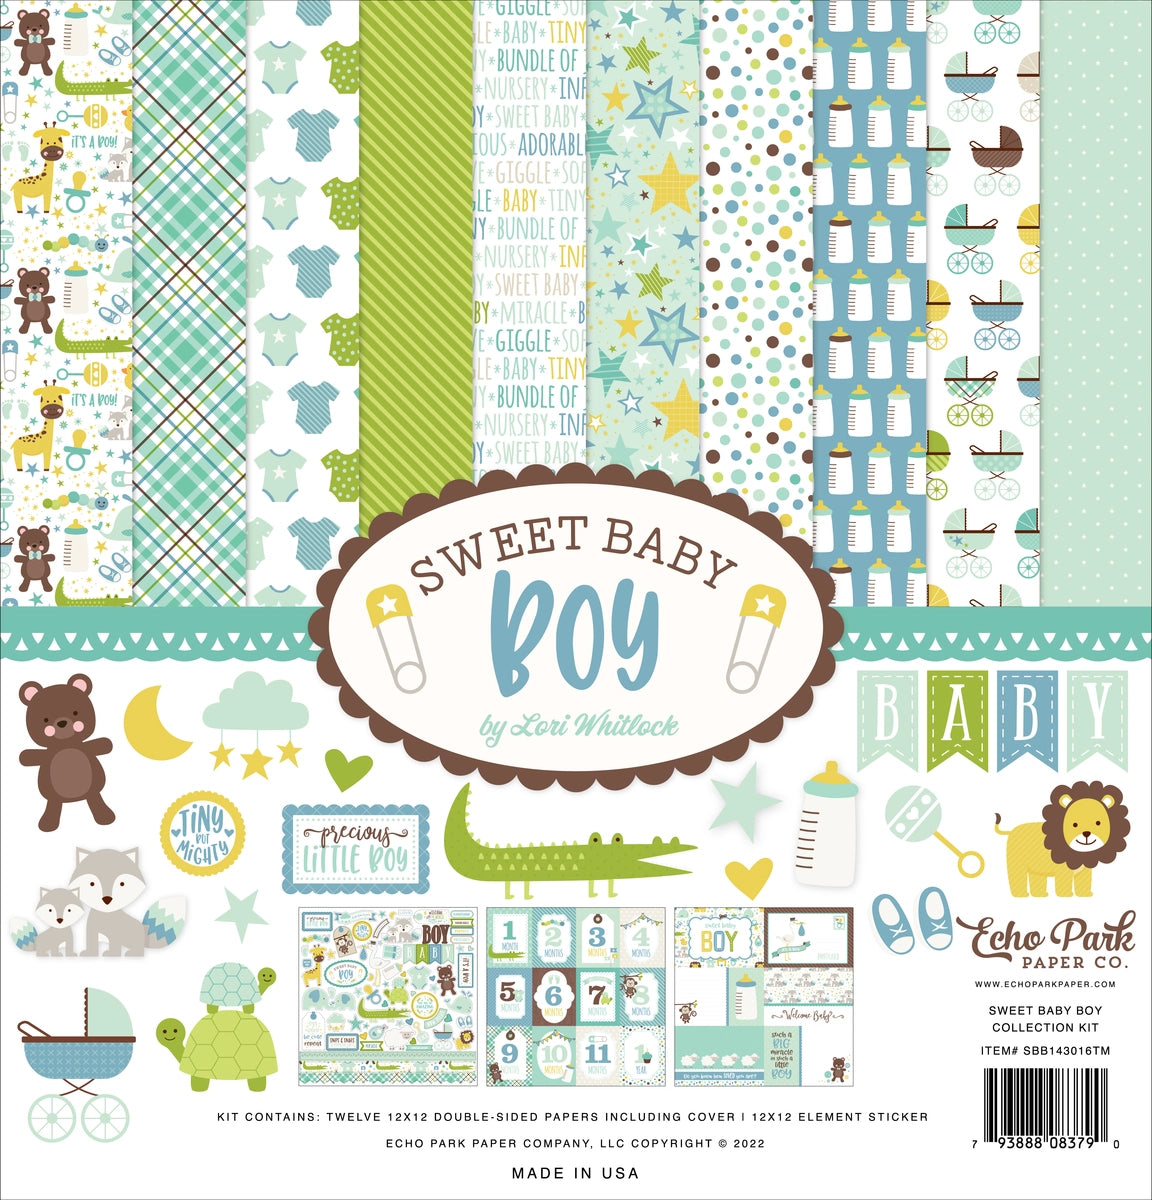 Echo Park™ Paper Co. Fall Paper Craft Collection Kit, 12 x 12